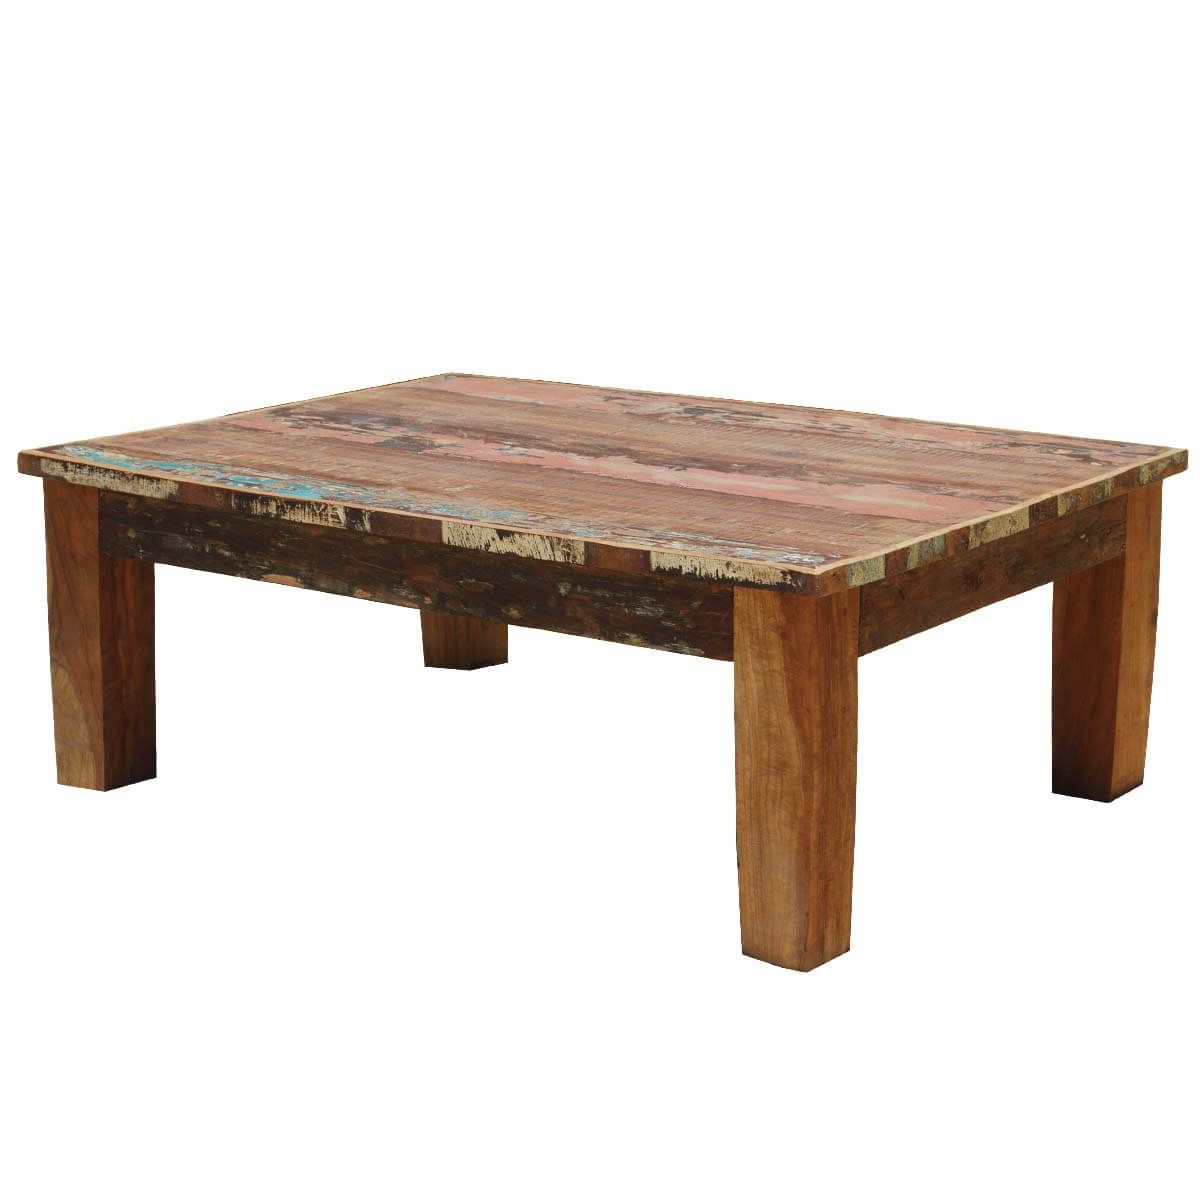 Preferred Culbertson Rustic Reclaimed Wood Rectangle Coffee Table Throughout Barnwood Coffee Tables (View 10 of 10)